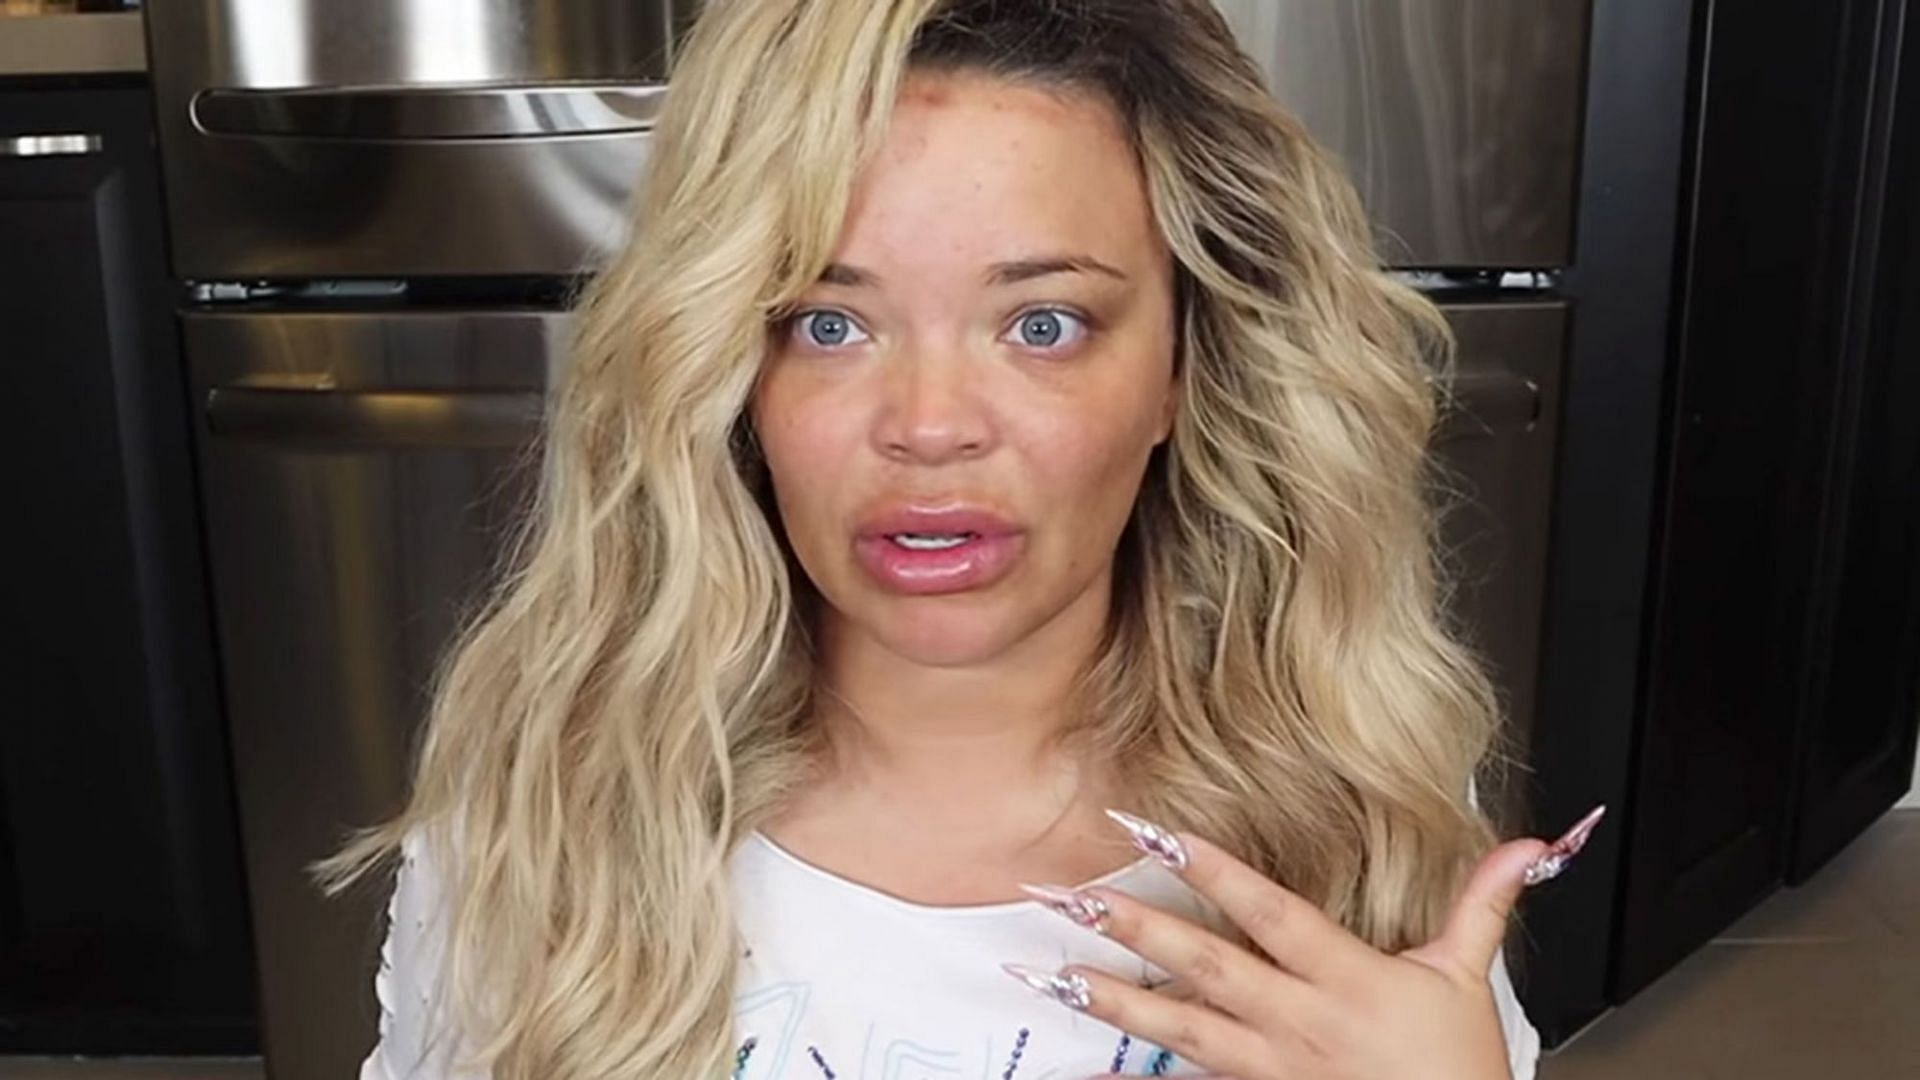 Trisha Paytas has become popular for her controversial YouTube videos (Image via YouTube)